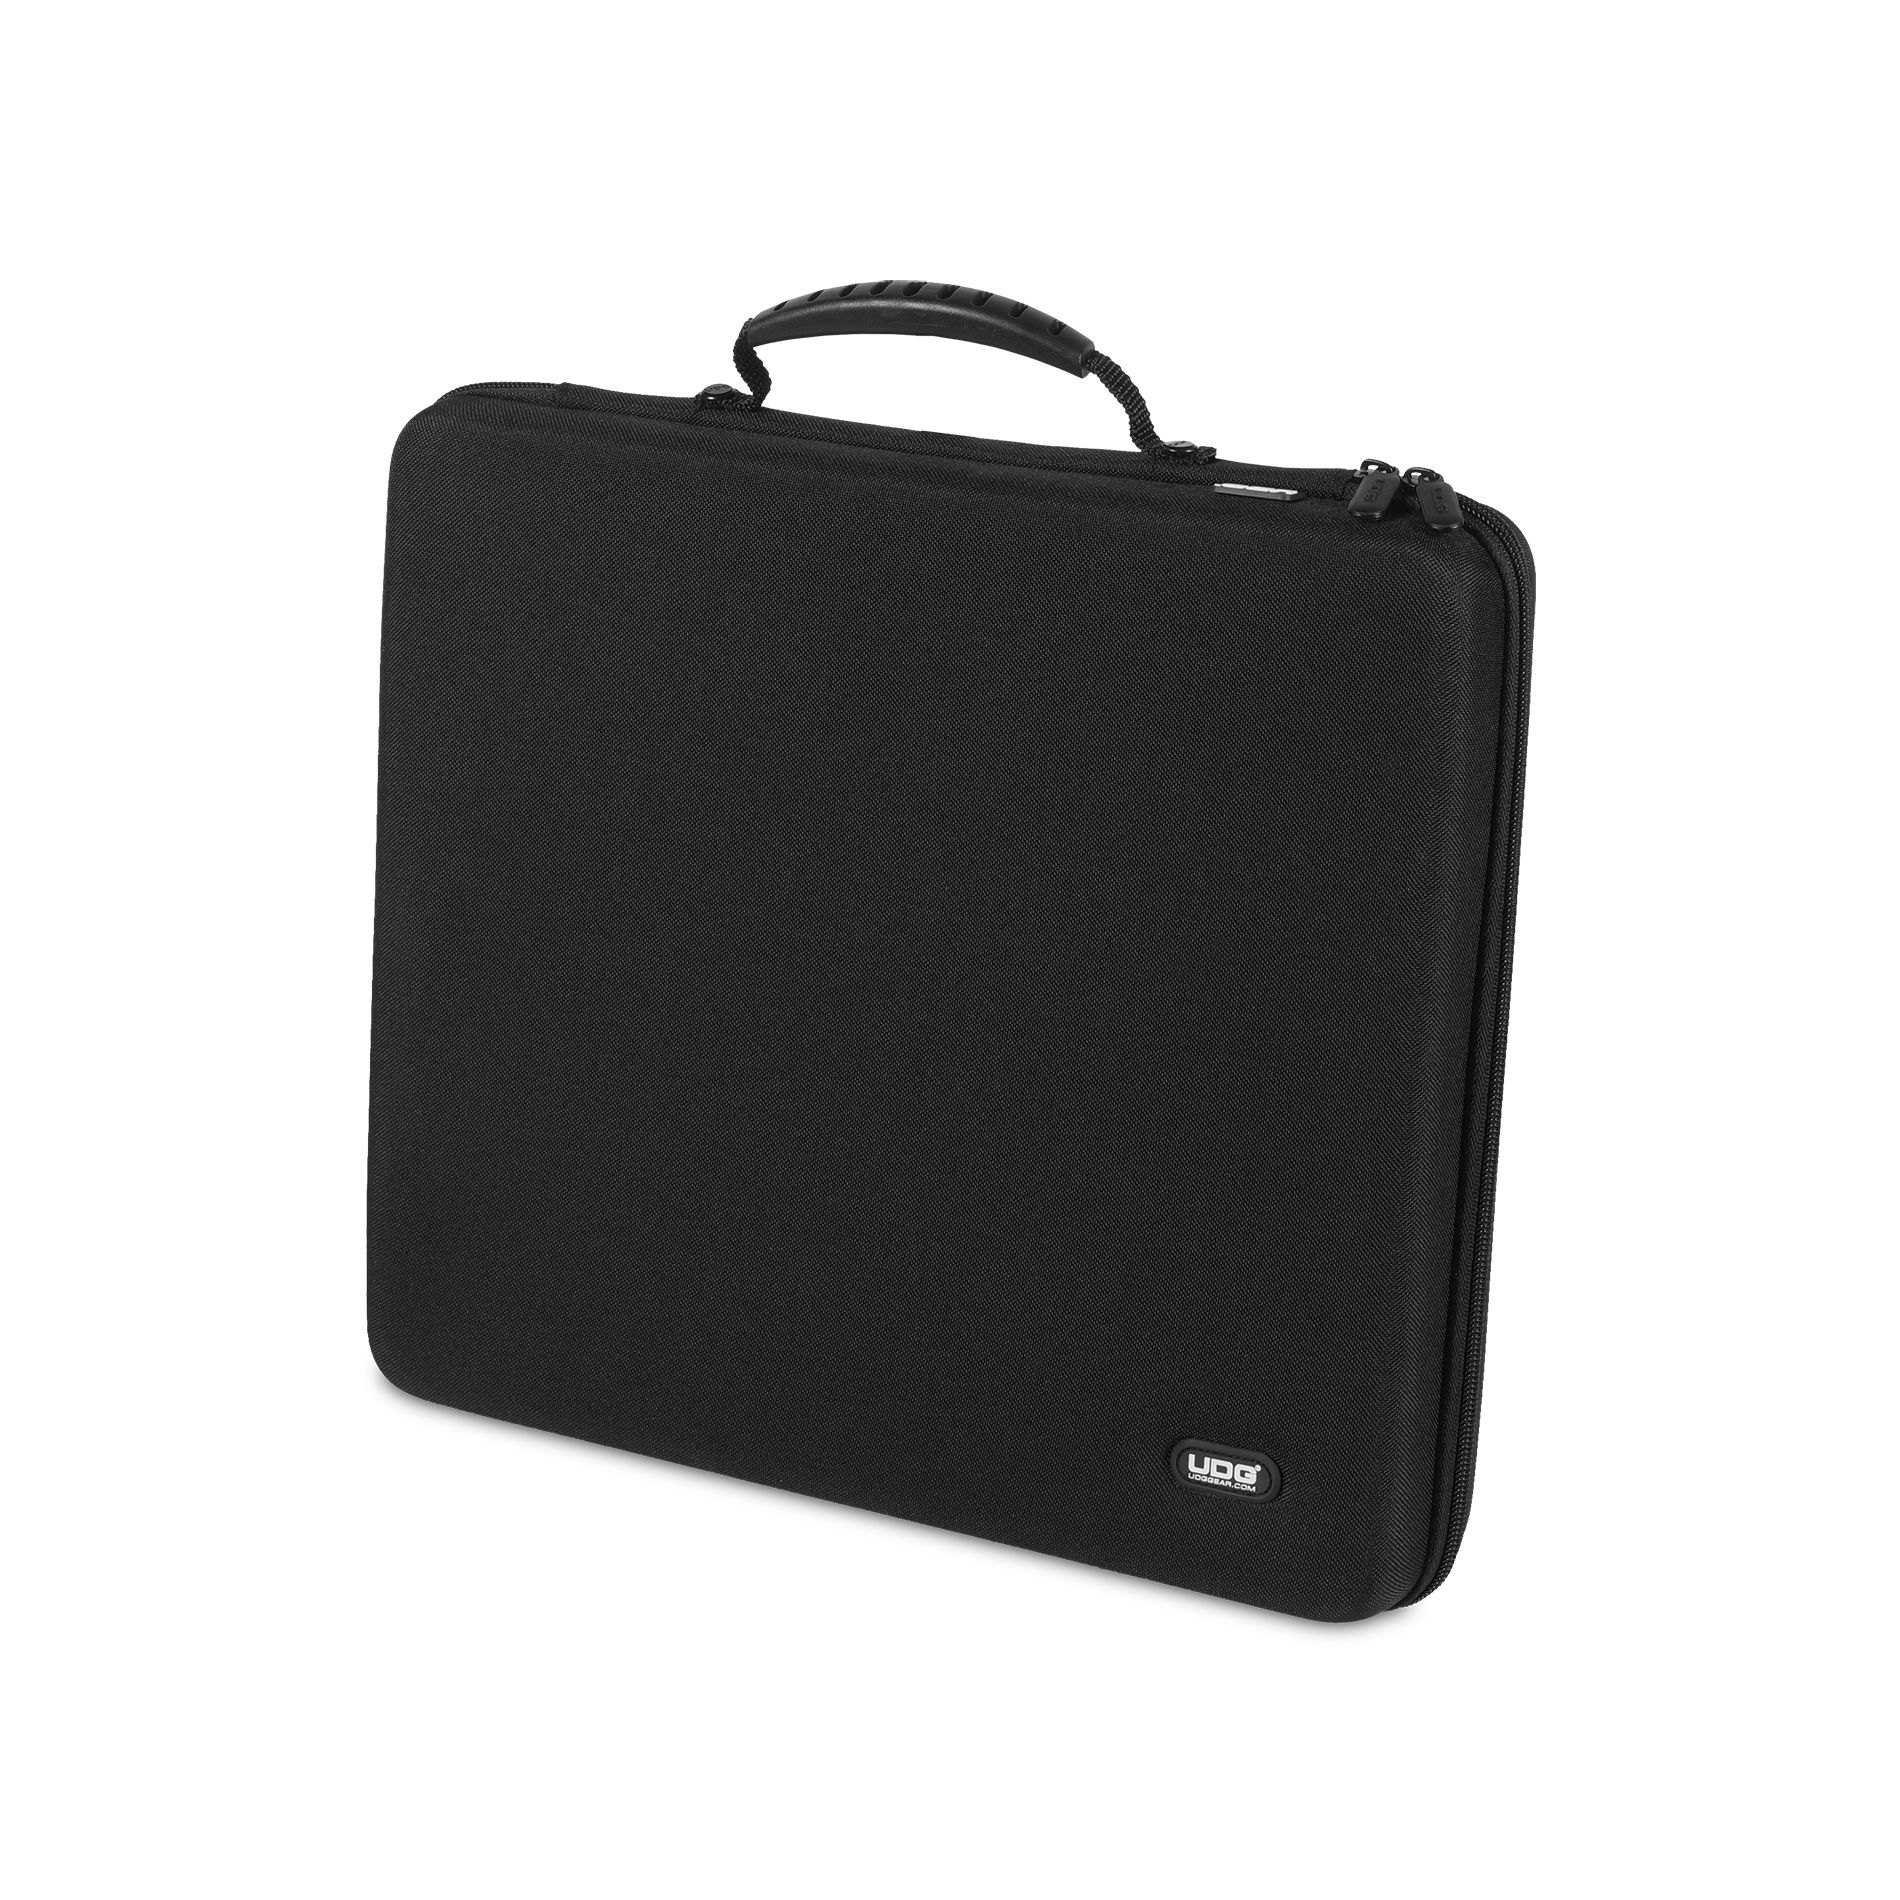 Udg U 8487 Bl (housse Pour Launchpad X) - Gigbag for studio product - Variation 1